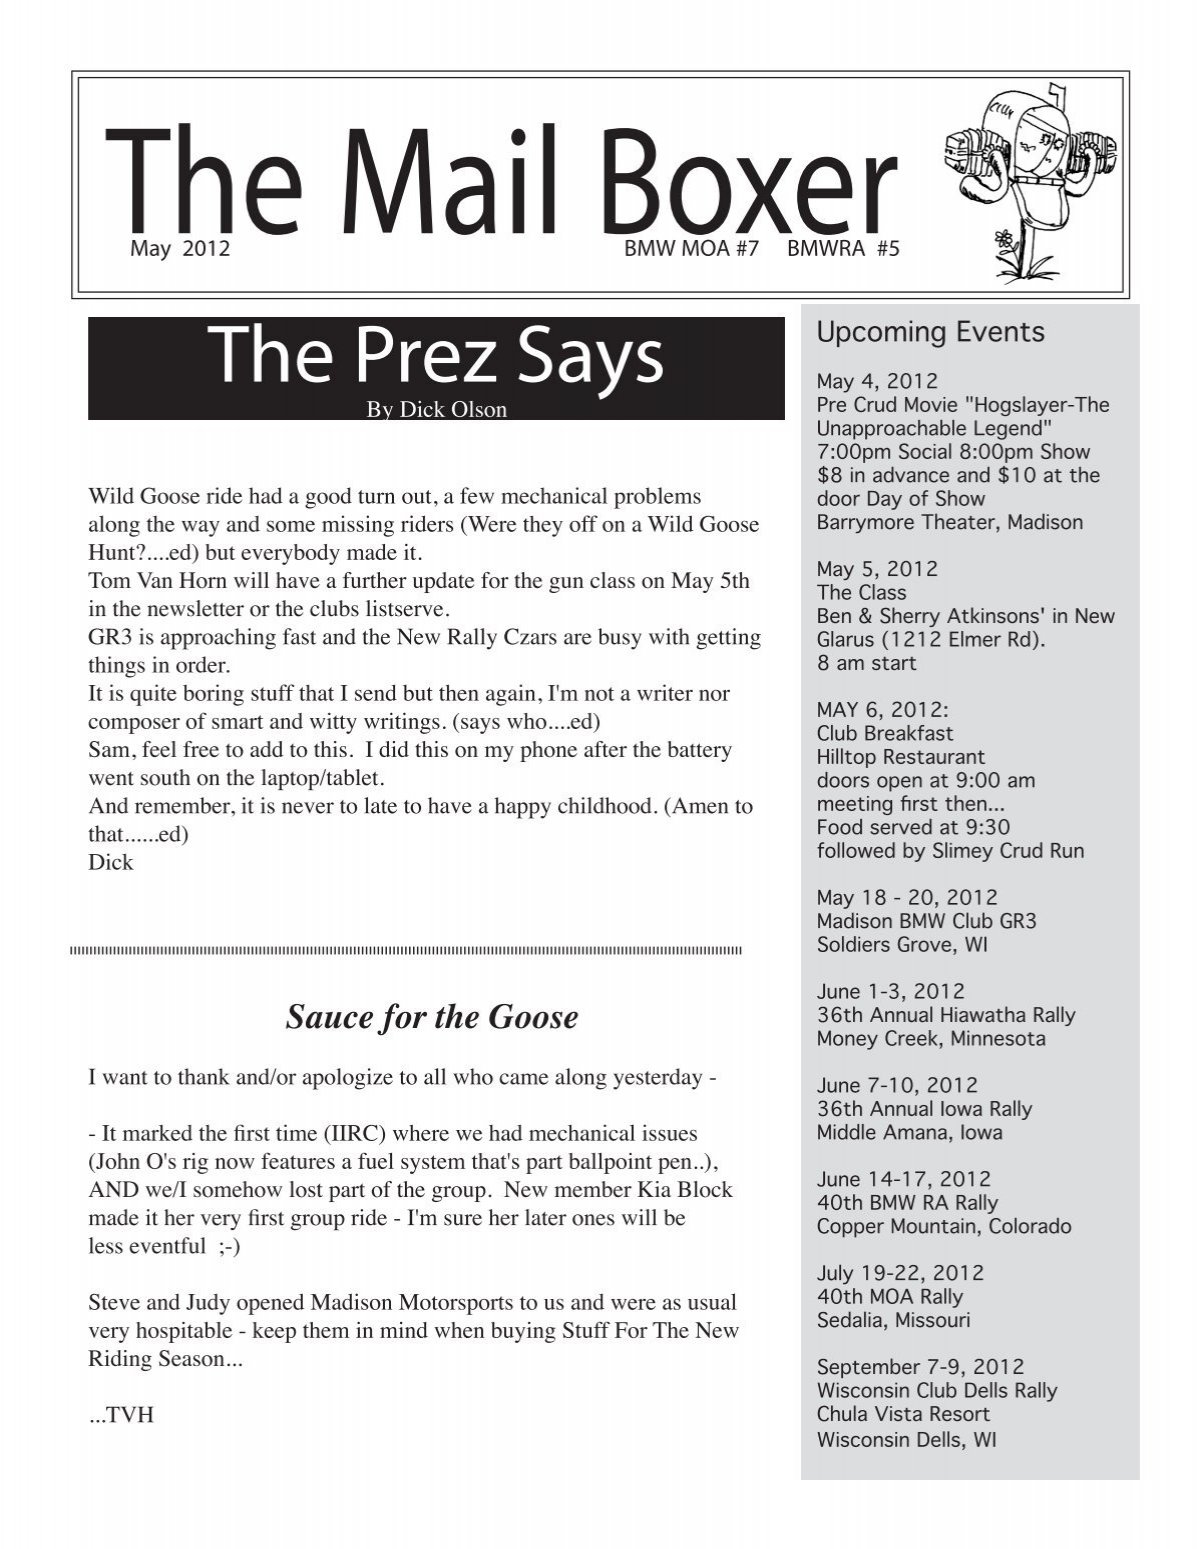 The Mail Boxer - Madison BMW Motorcycle Club